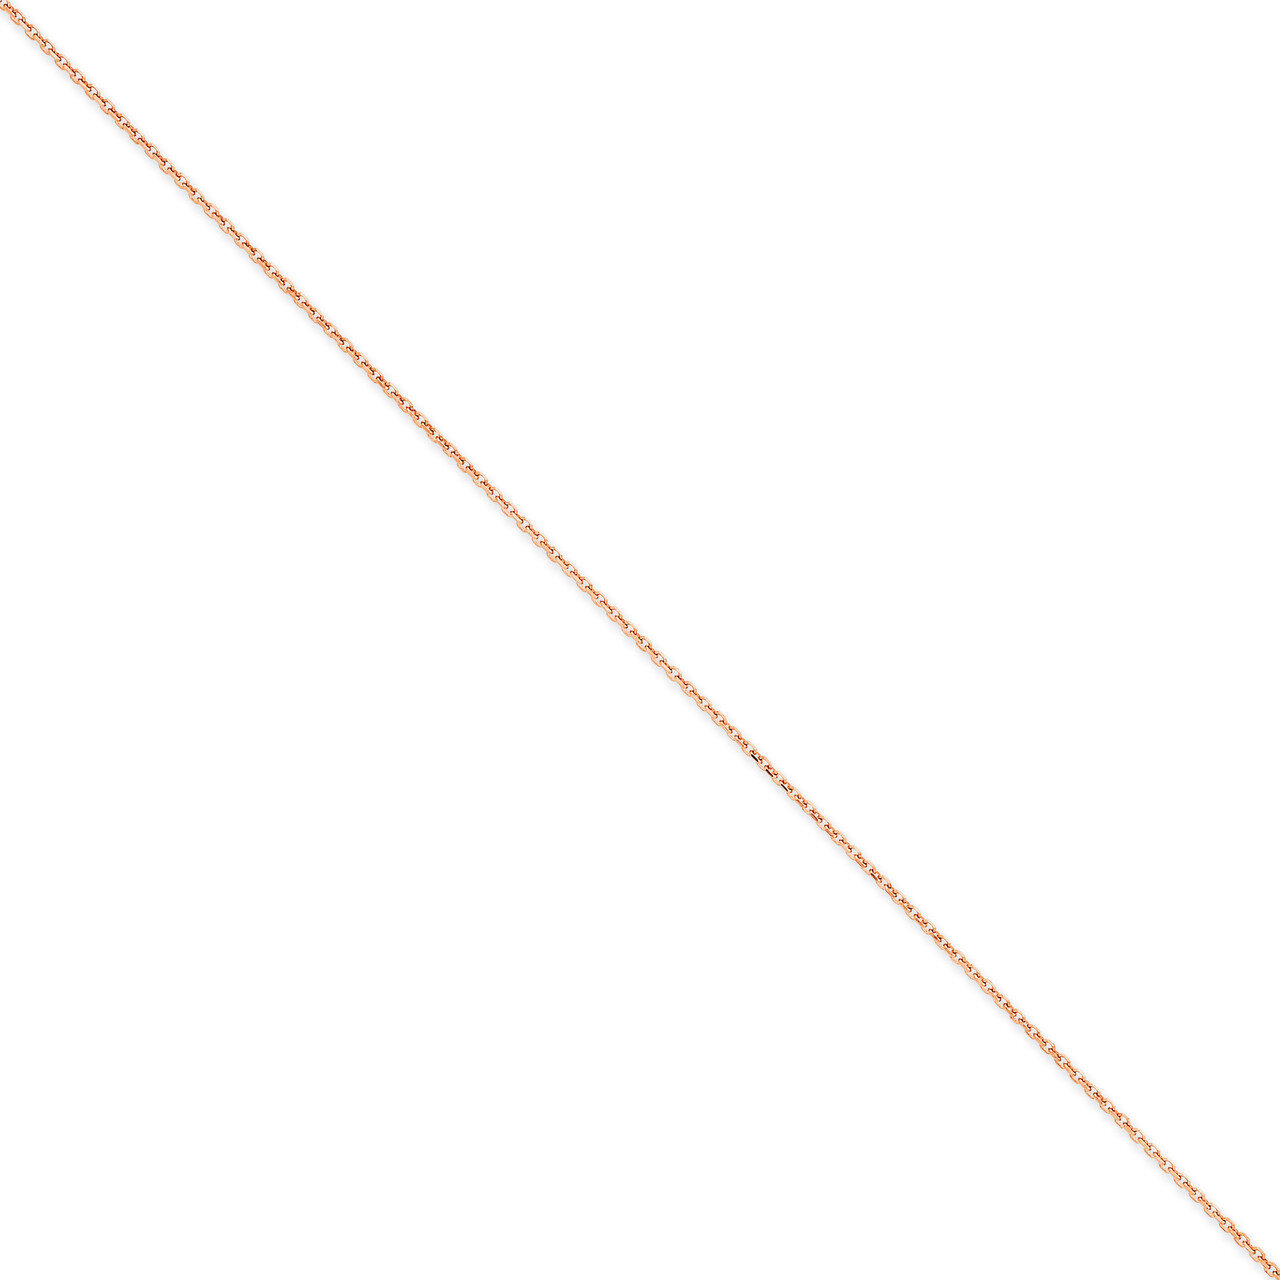 1.4mm Diamond-cut Cable Chain 24 Inch 14k Rose Gold RSC21-24